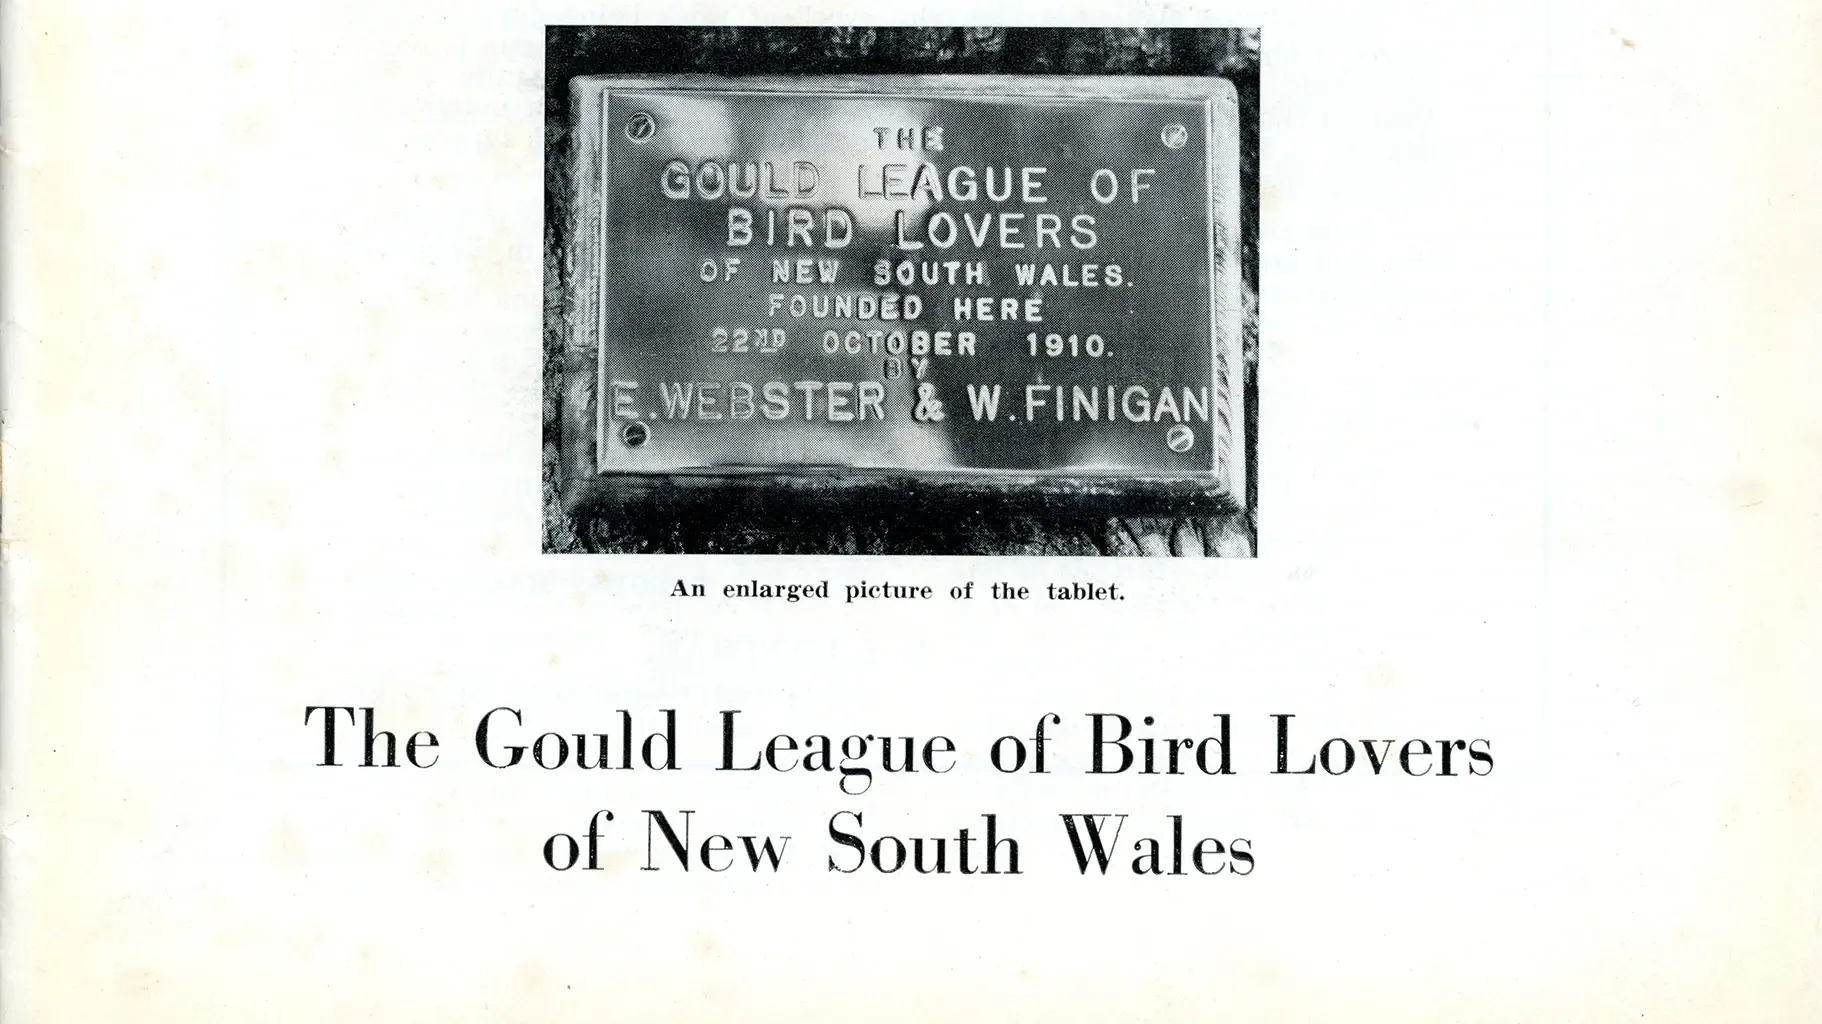 There were several Gould Leagues in various parts of Australia. The first was founded in Victoria in 1909. The Gould League of New South Wales was founded a year later by a young teacher, Edward Webster, and a headmaster, Walter Finigan. The Gould Leagues helped make studying nature part of school lessons in Australia. The League has inspired generations of Australians to protect and love nature and has had a major impact on environmental education. Where do you learn about nature?